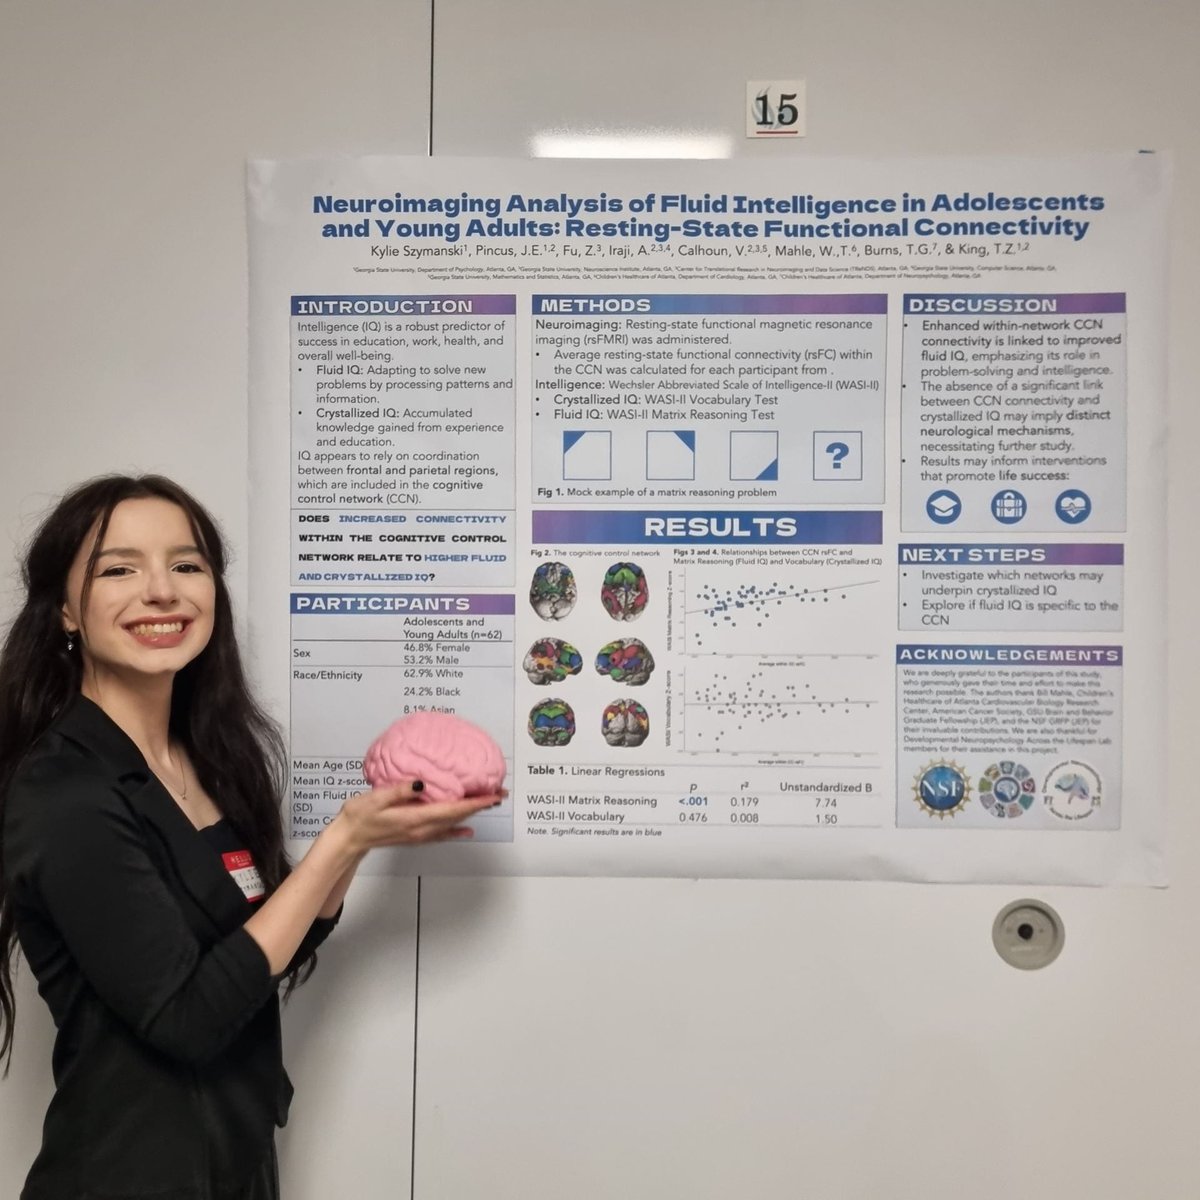 November was filled with many celebrations! First, we're so proud of our talented undergraduates who presented at the year’s GSU Psychology Undergraduate Research Conference! Congratulation to Allison Lipstein as she won Best Overall and the Neuroscience award! @GSUPsychology